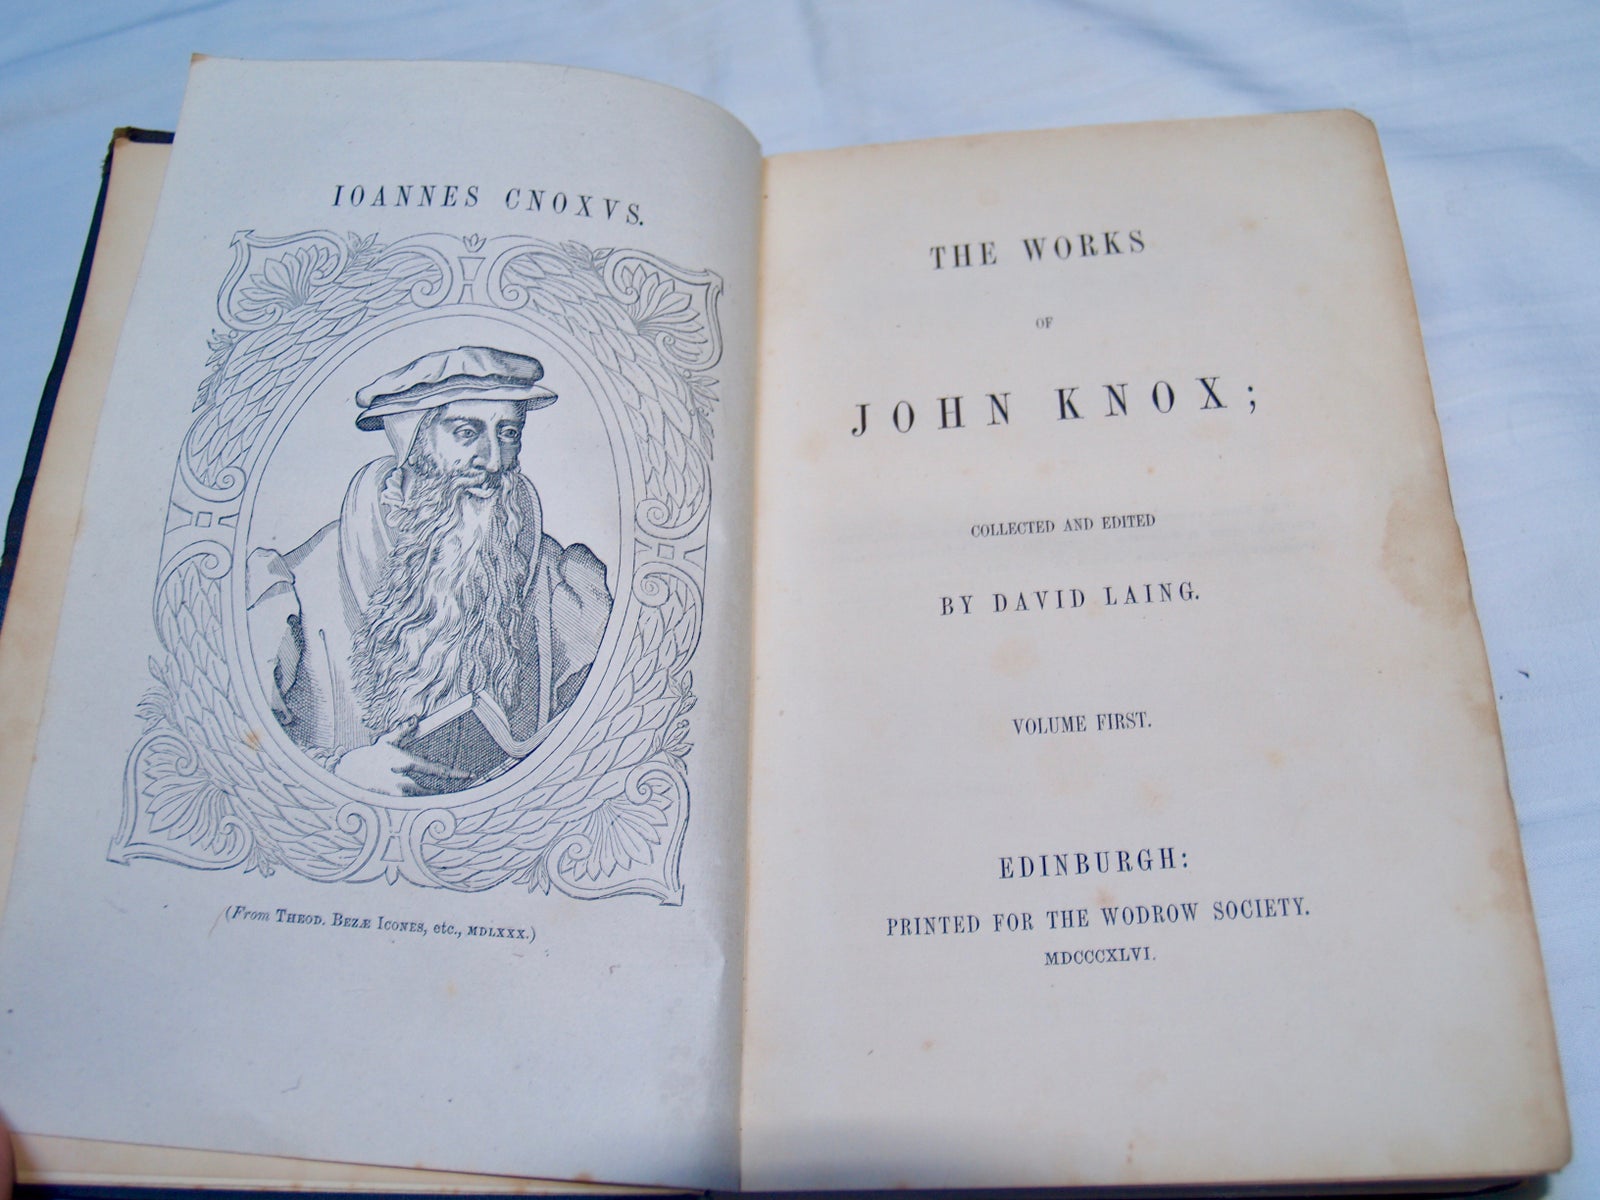 The Works of, John Knox